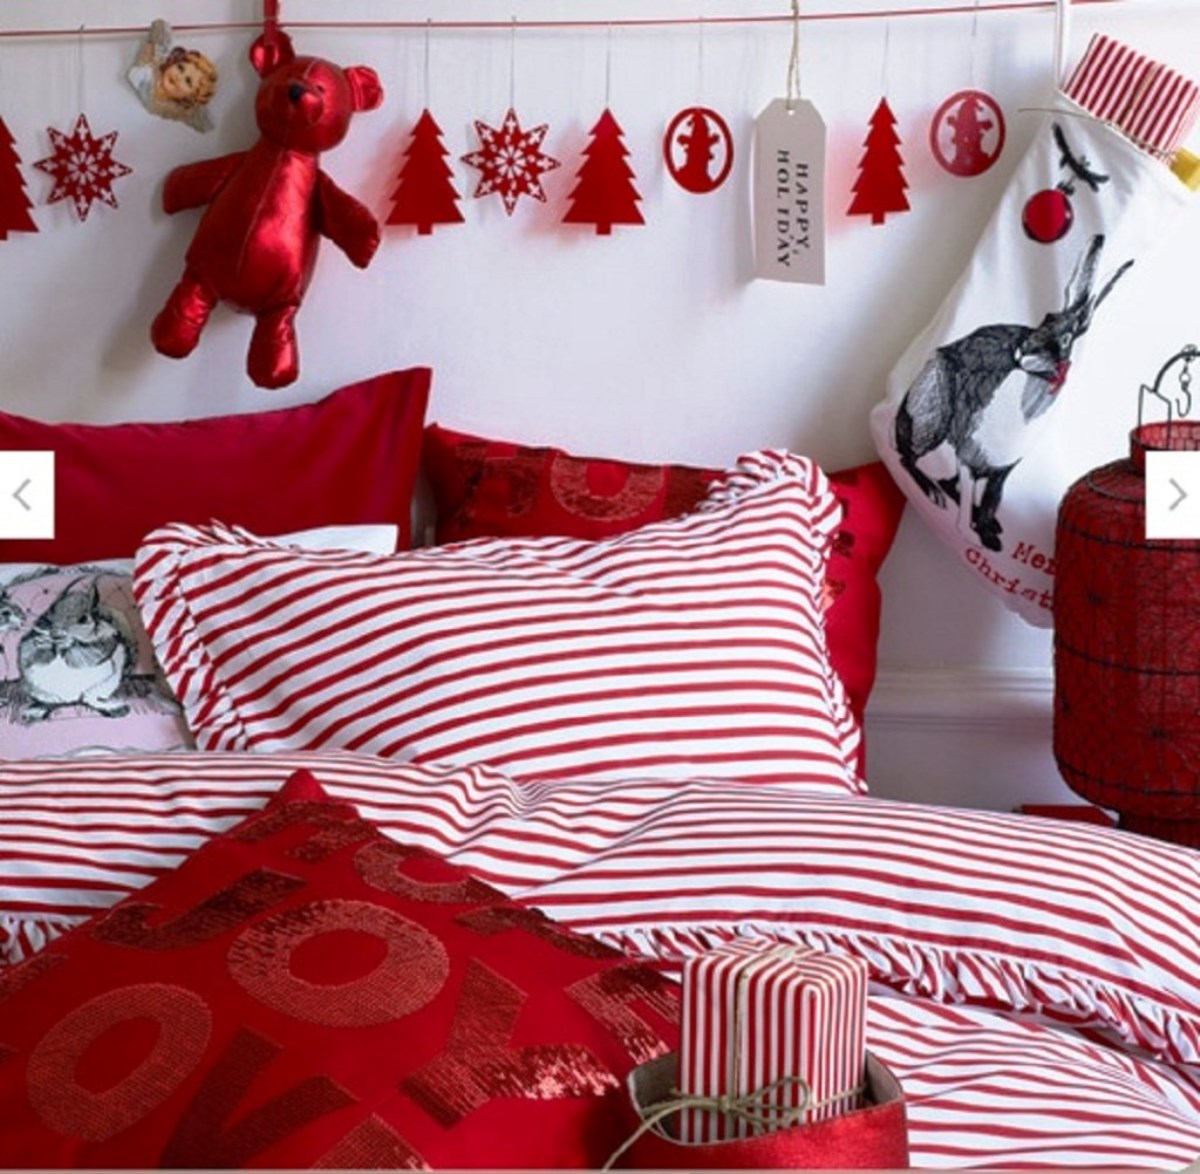 BEDROOMS AT THE BEST FOR THE FESTIVE SEASON ...